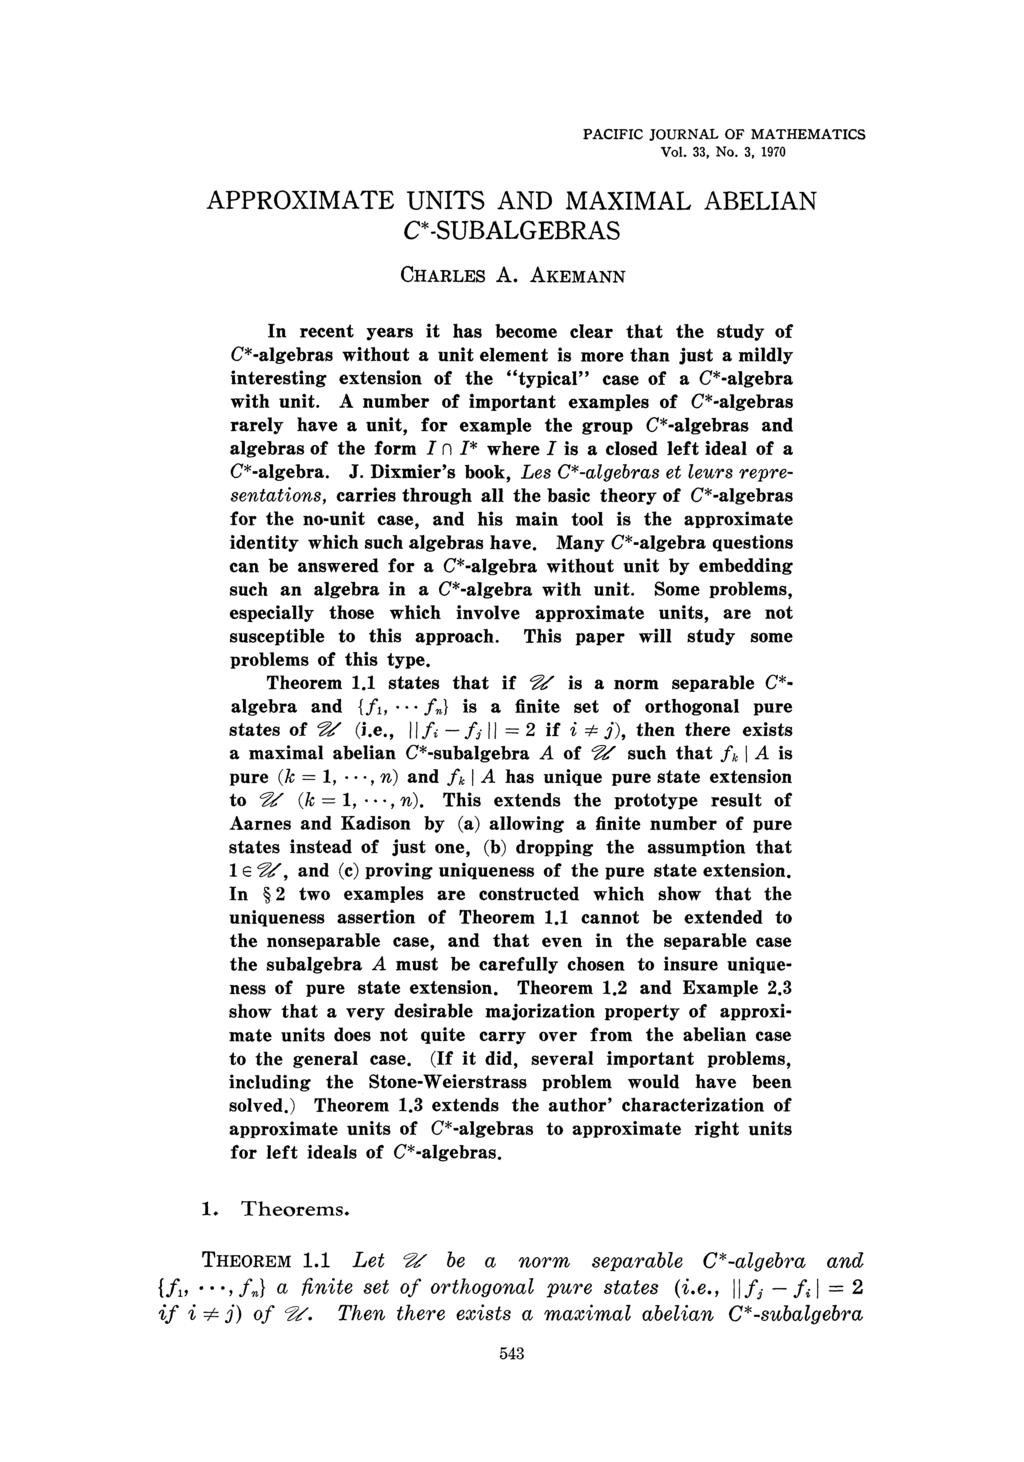 PACIFIC JOURNAL OF MATHEMATICS Vol. 33, No. 3, 1970 APPROXIMATE UNITS AND MAXIMAL ABELIAN C*-SUBALGEBRAS CHARLES A.